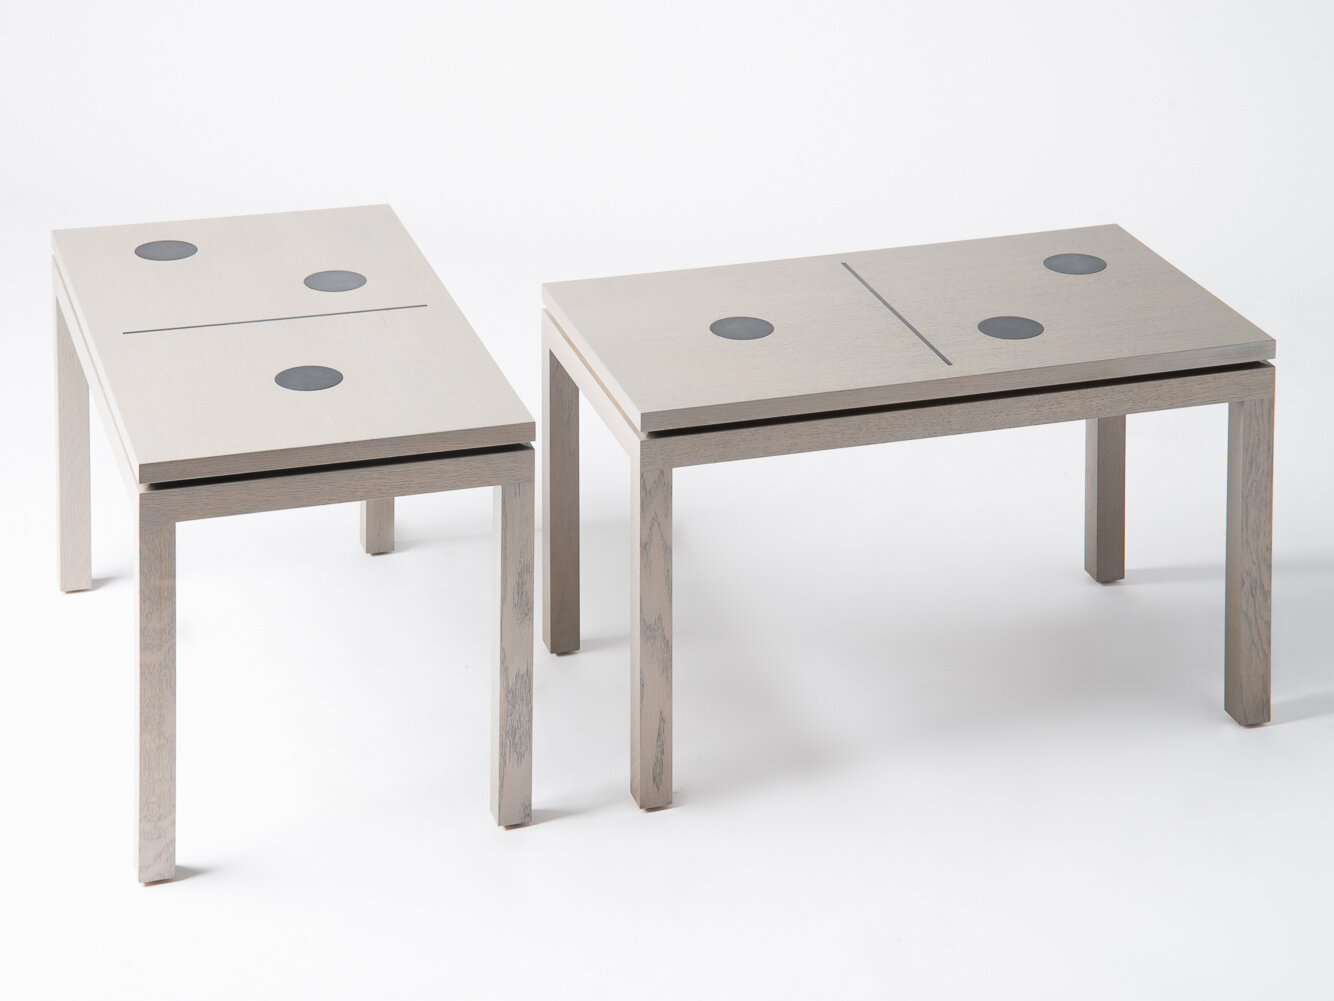 Domino Side Tables - by Amy Somerville Interior Designers Bath bespoke furniture